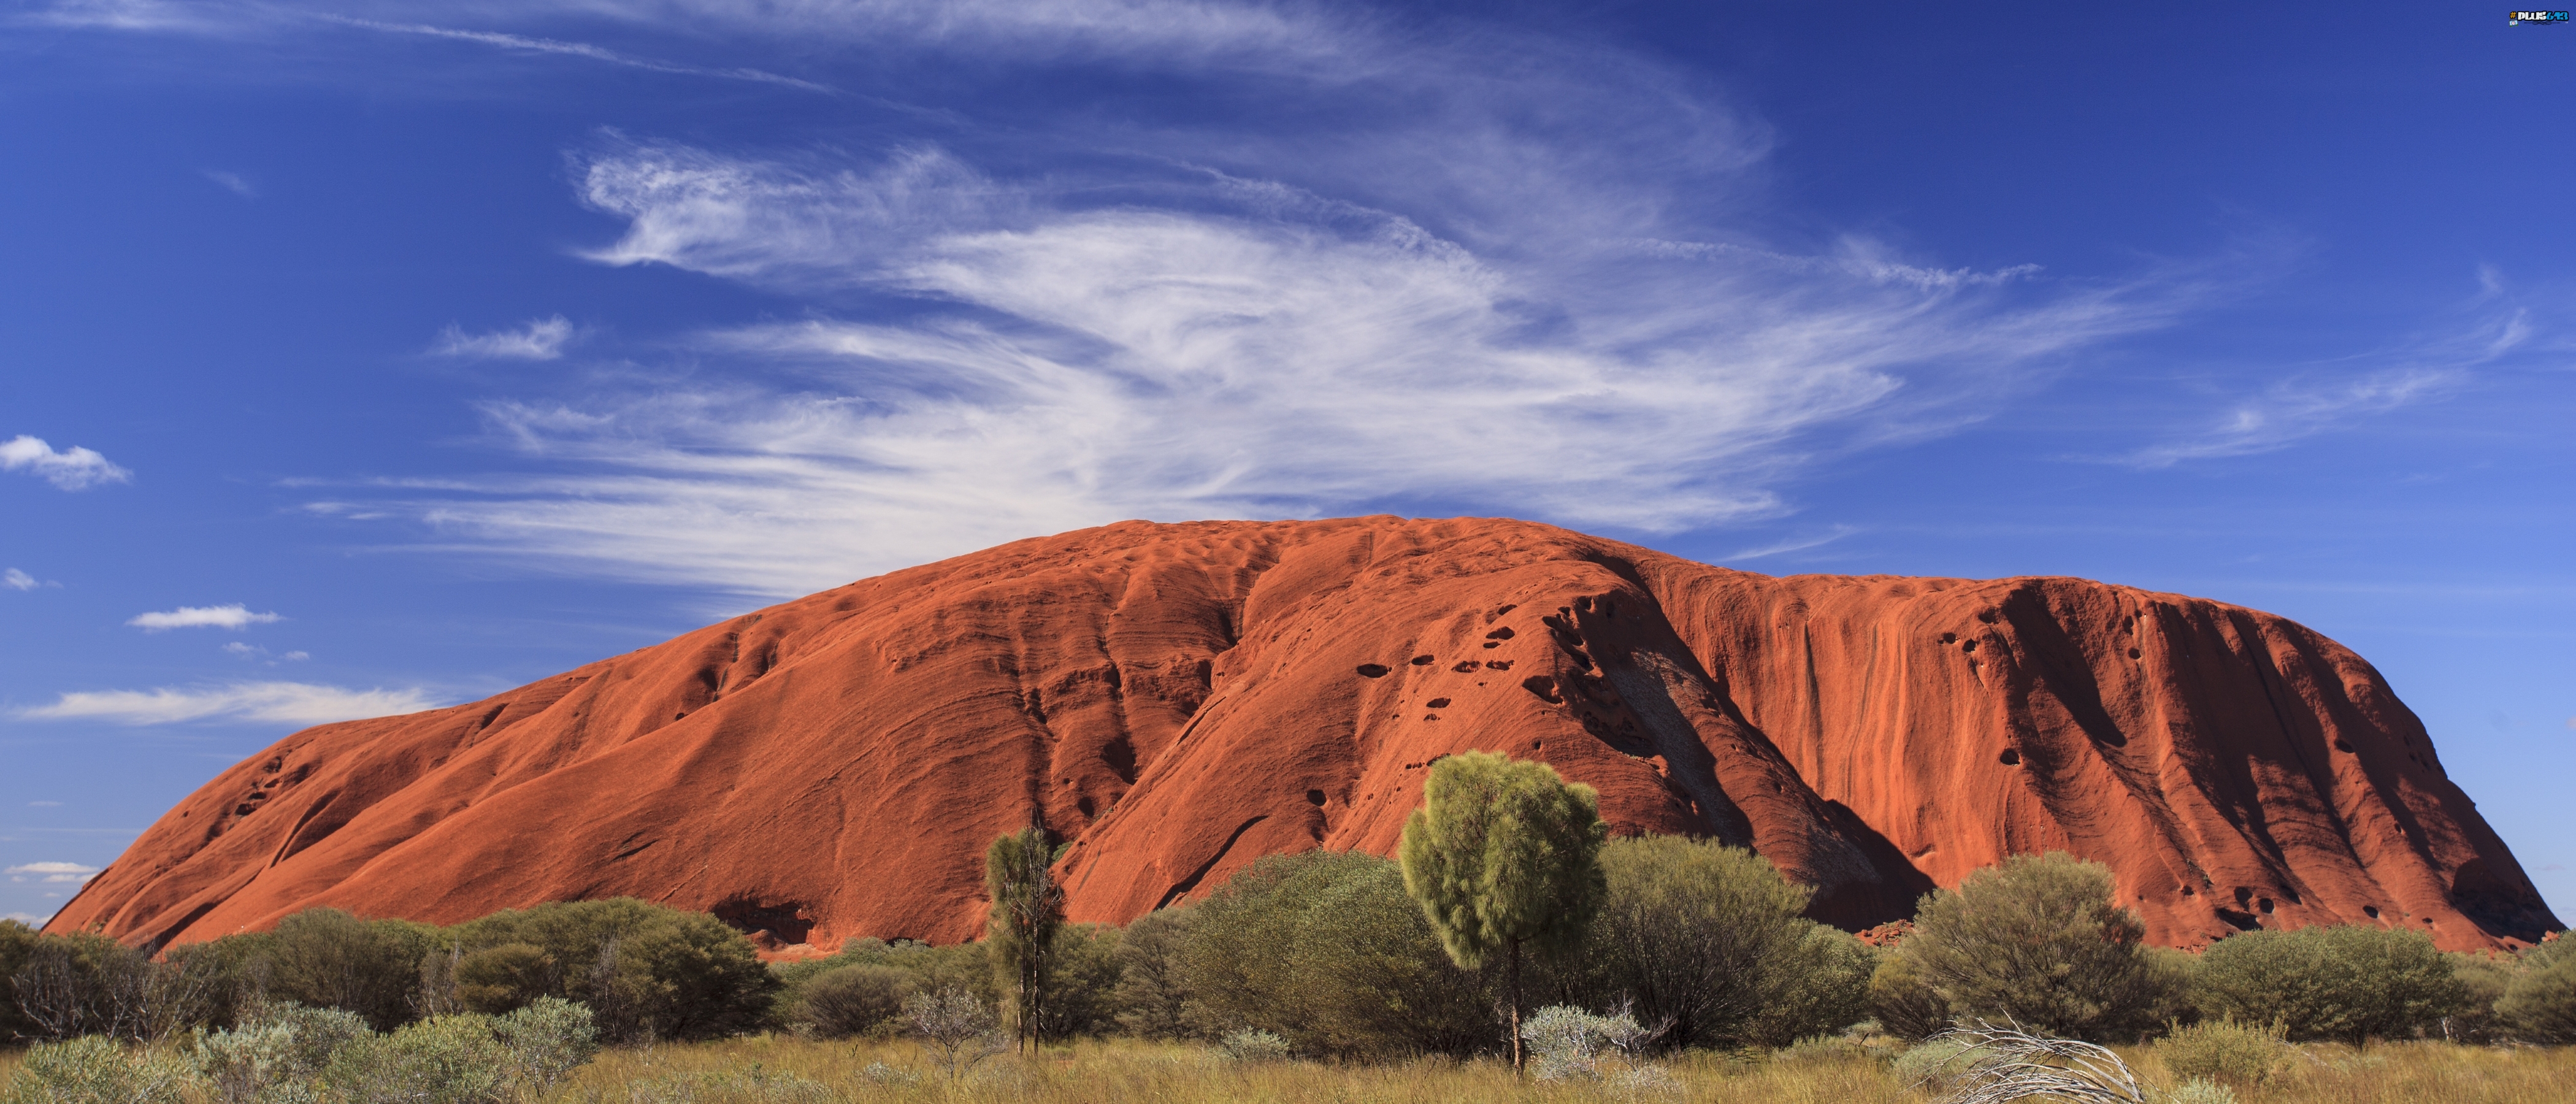 Largest exposed monolith, nation's centre, politics changed the name to Uluru.